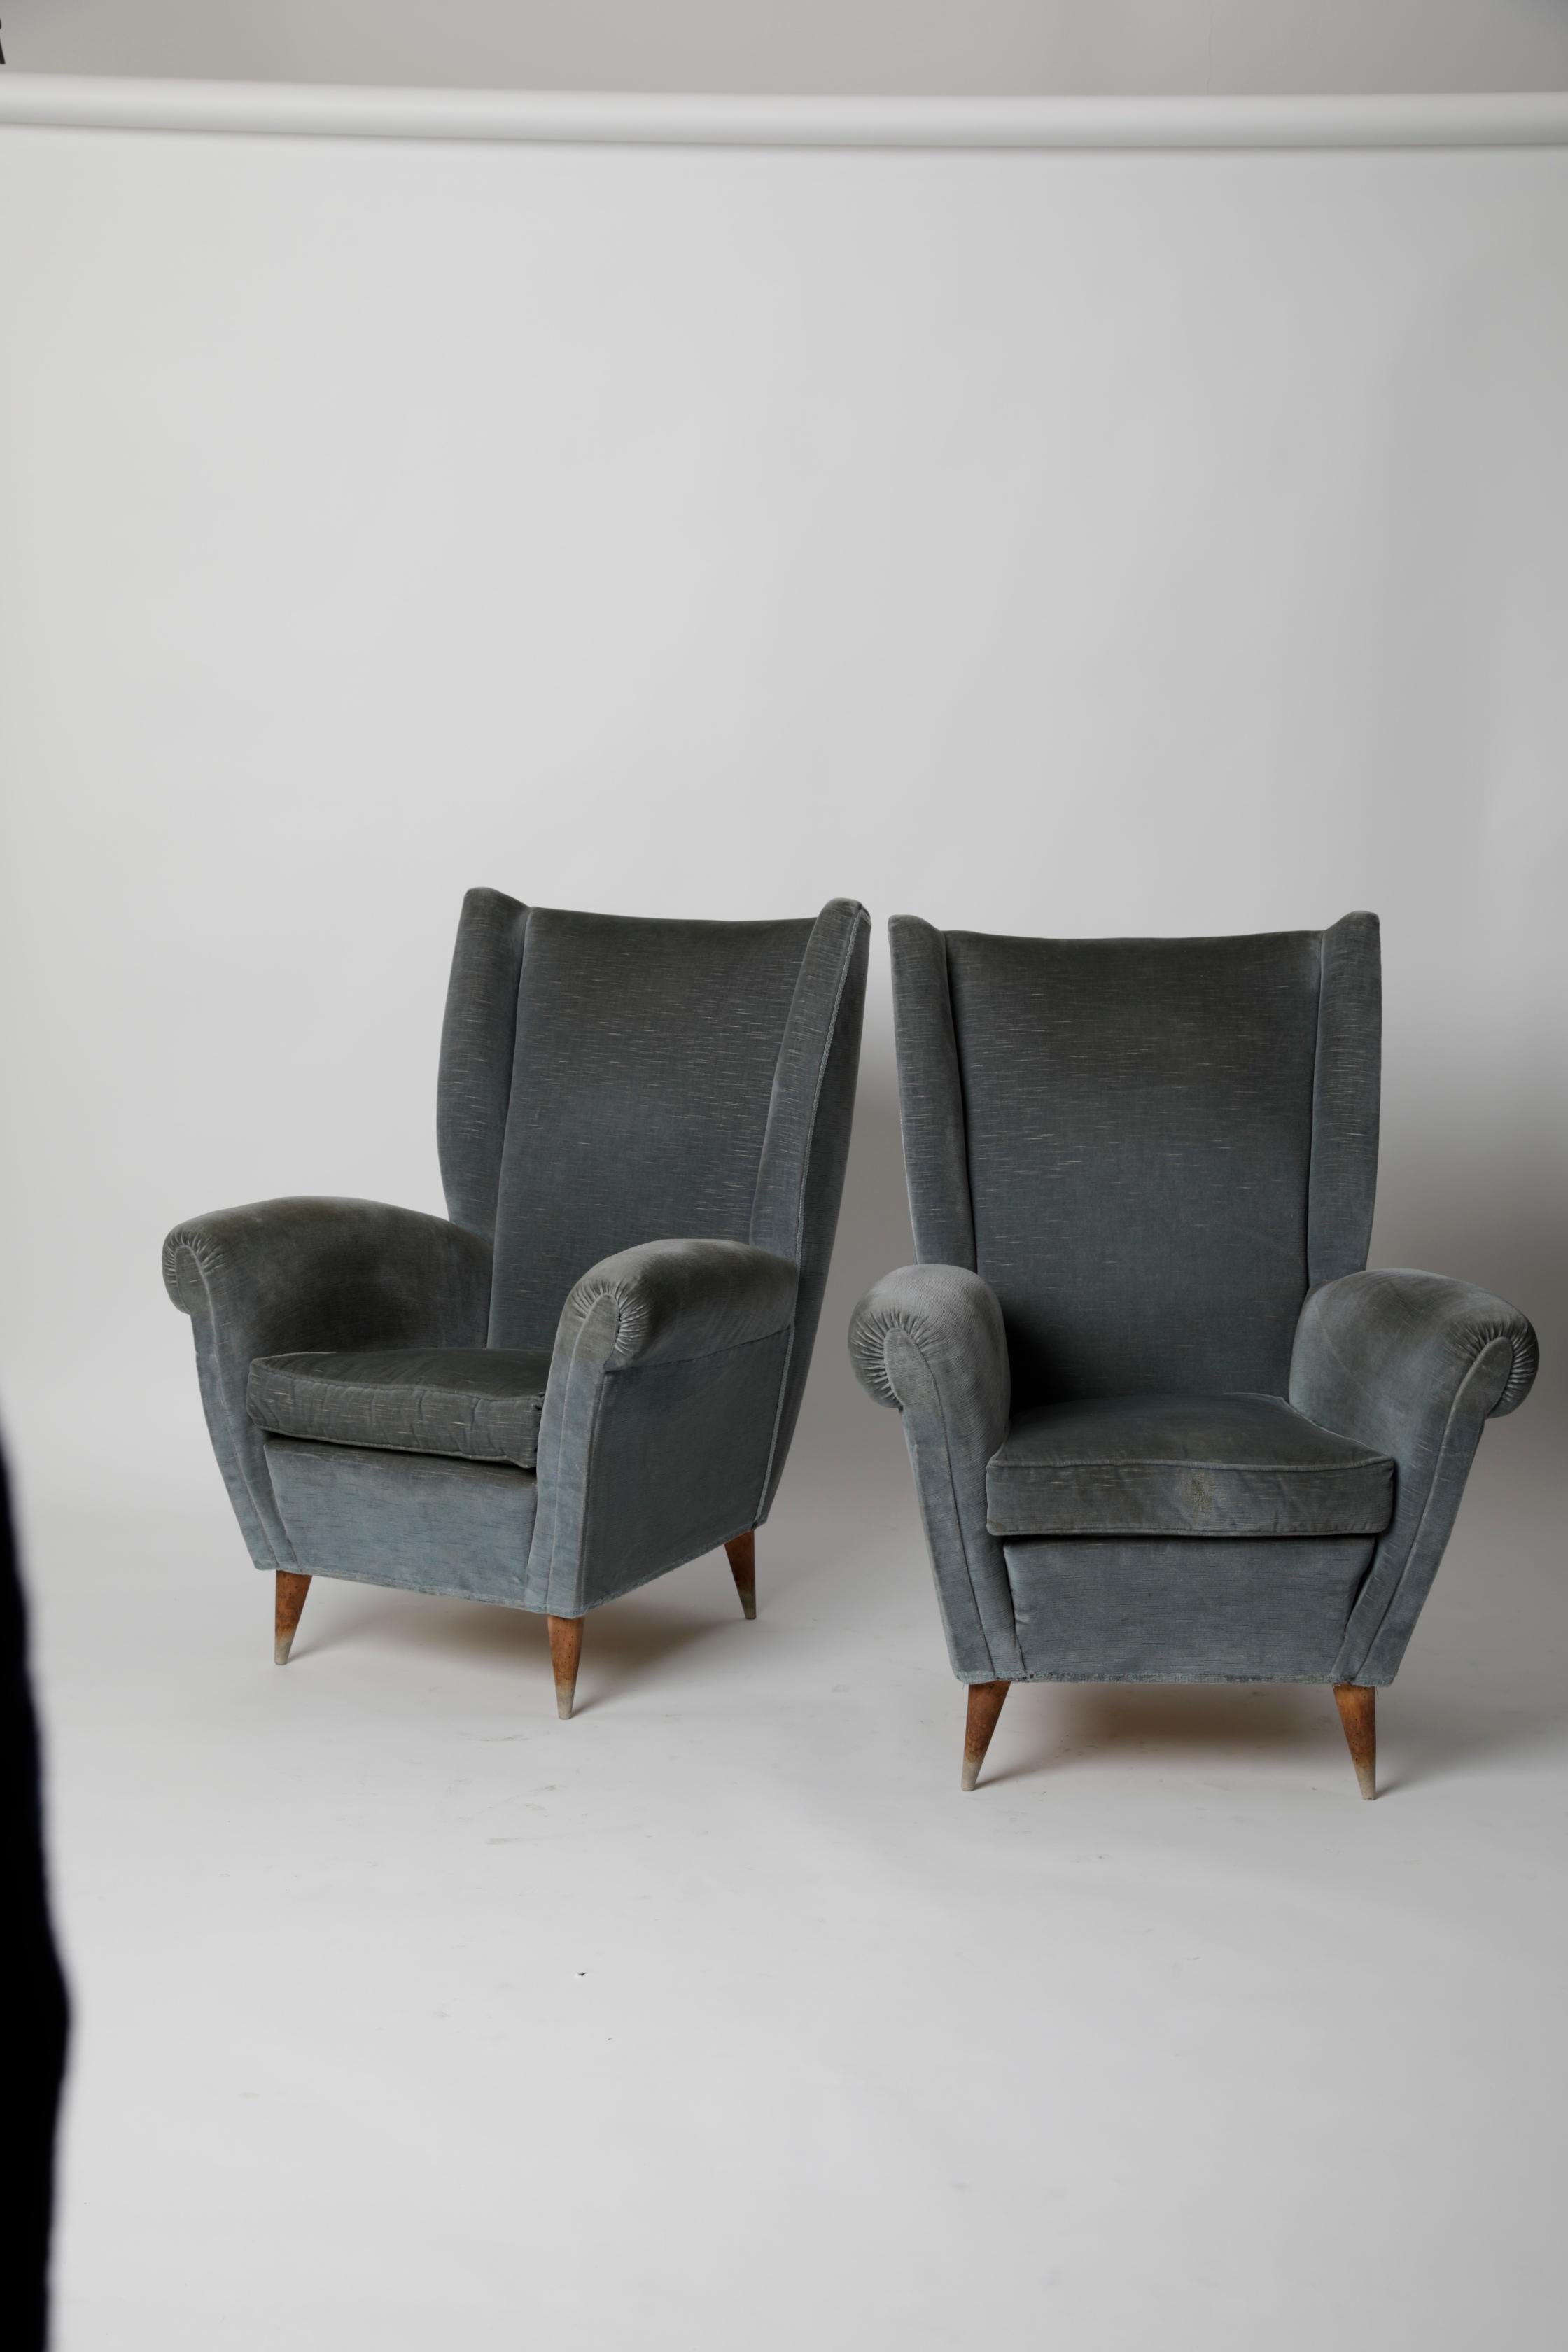 Mid-20th Century Pair of Italian Mid Century Lounge Chairs by Gio Ponti Attr. for I.S.A. Bergamo